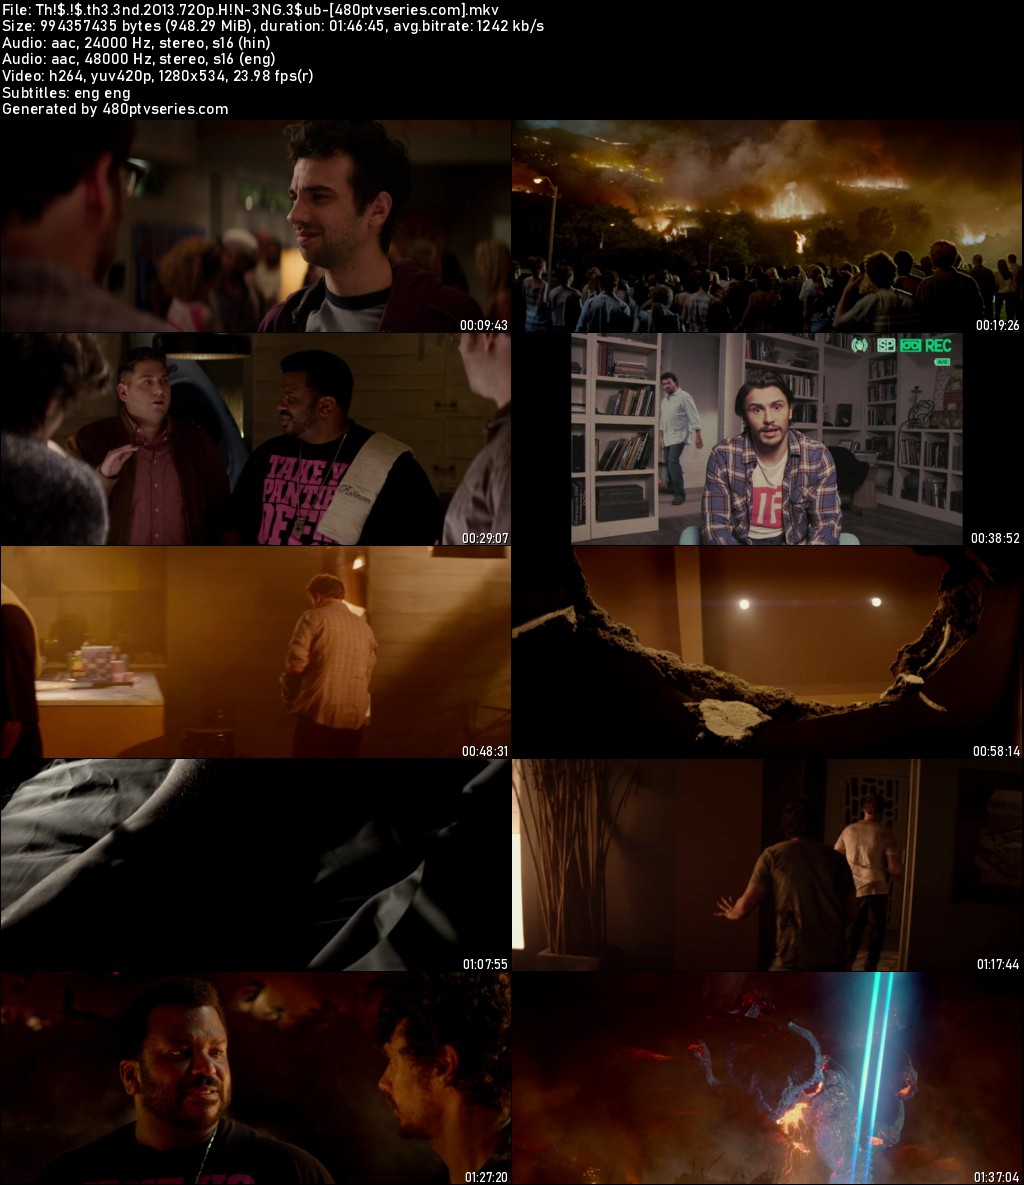 Watch Online Free This Is the End (2013) Full Hindi Dual Audio Movie Download 480p 720p BluRay